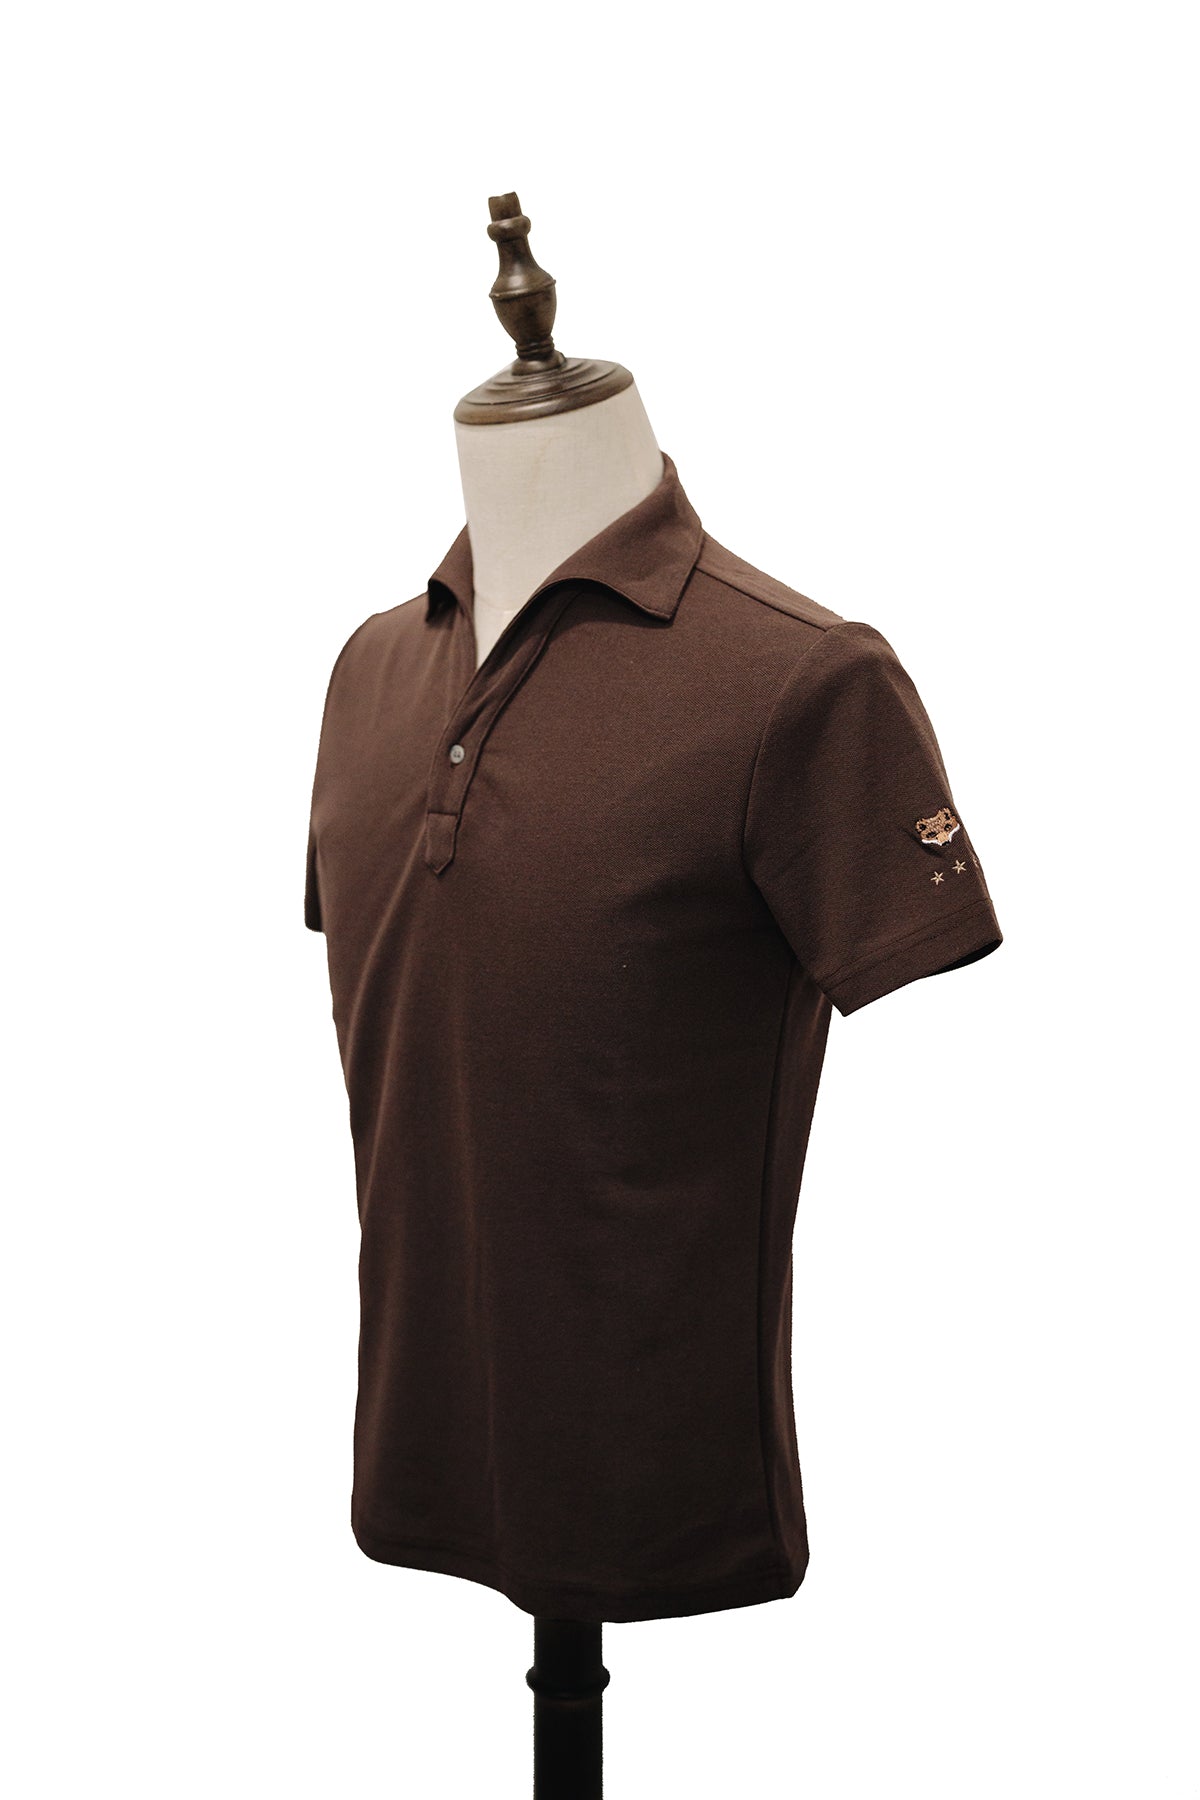 One Piece Collar Polo Tee - Brown - Assemble Singapore